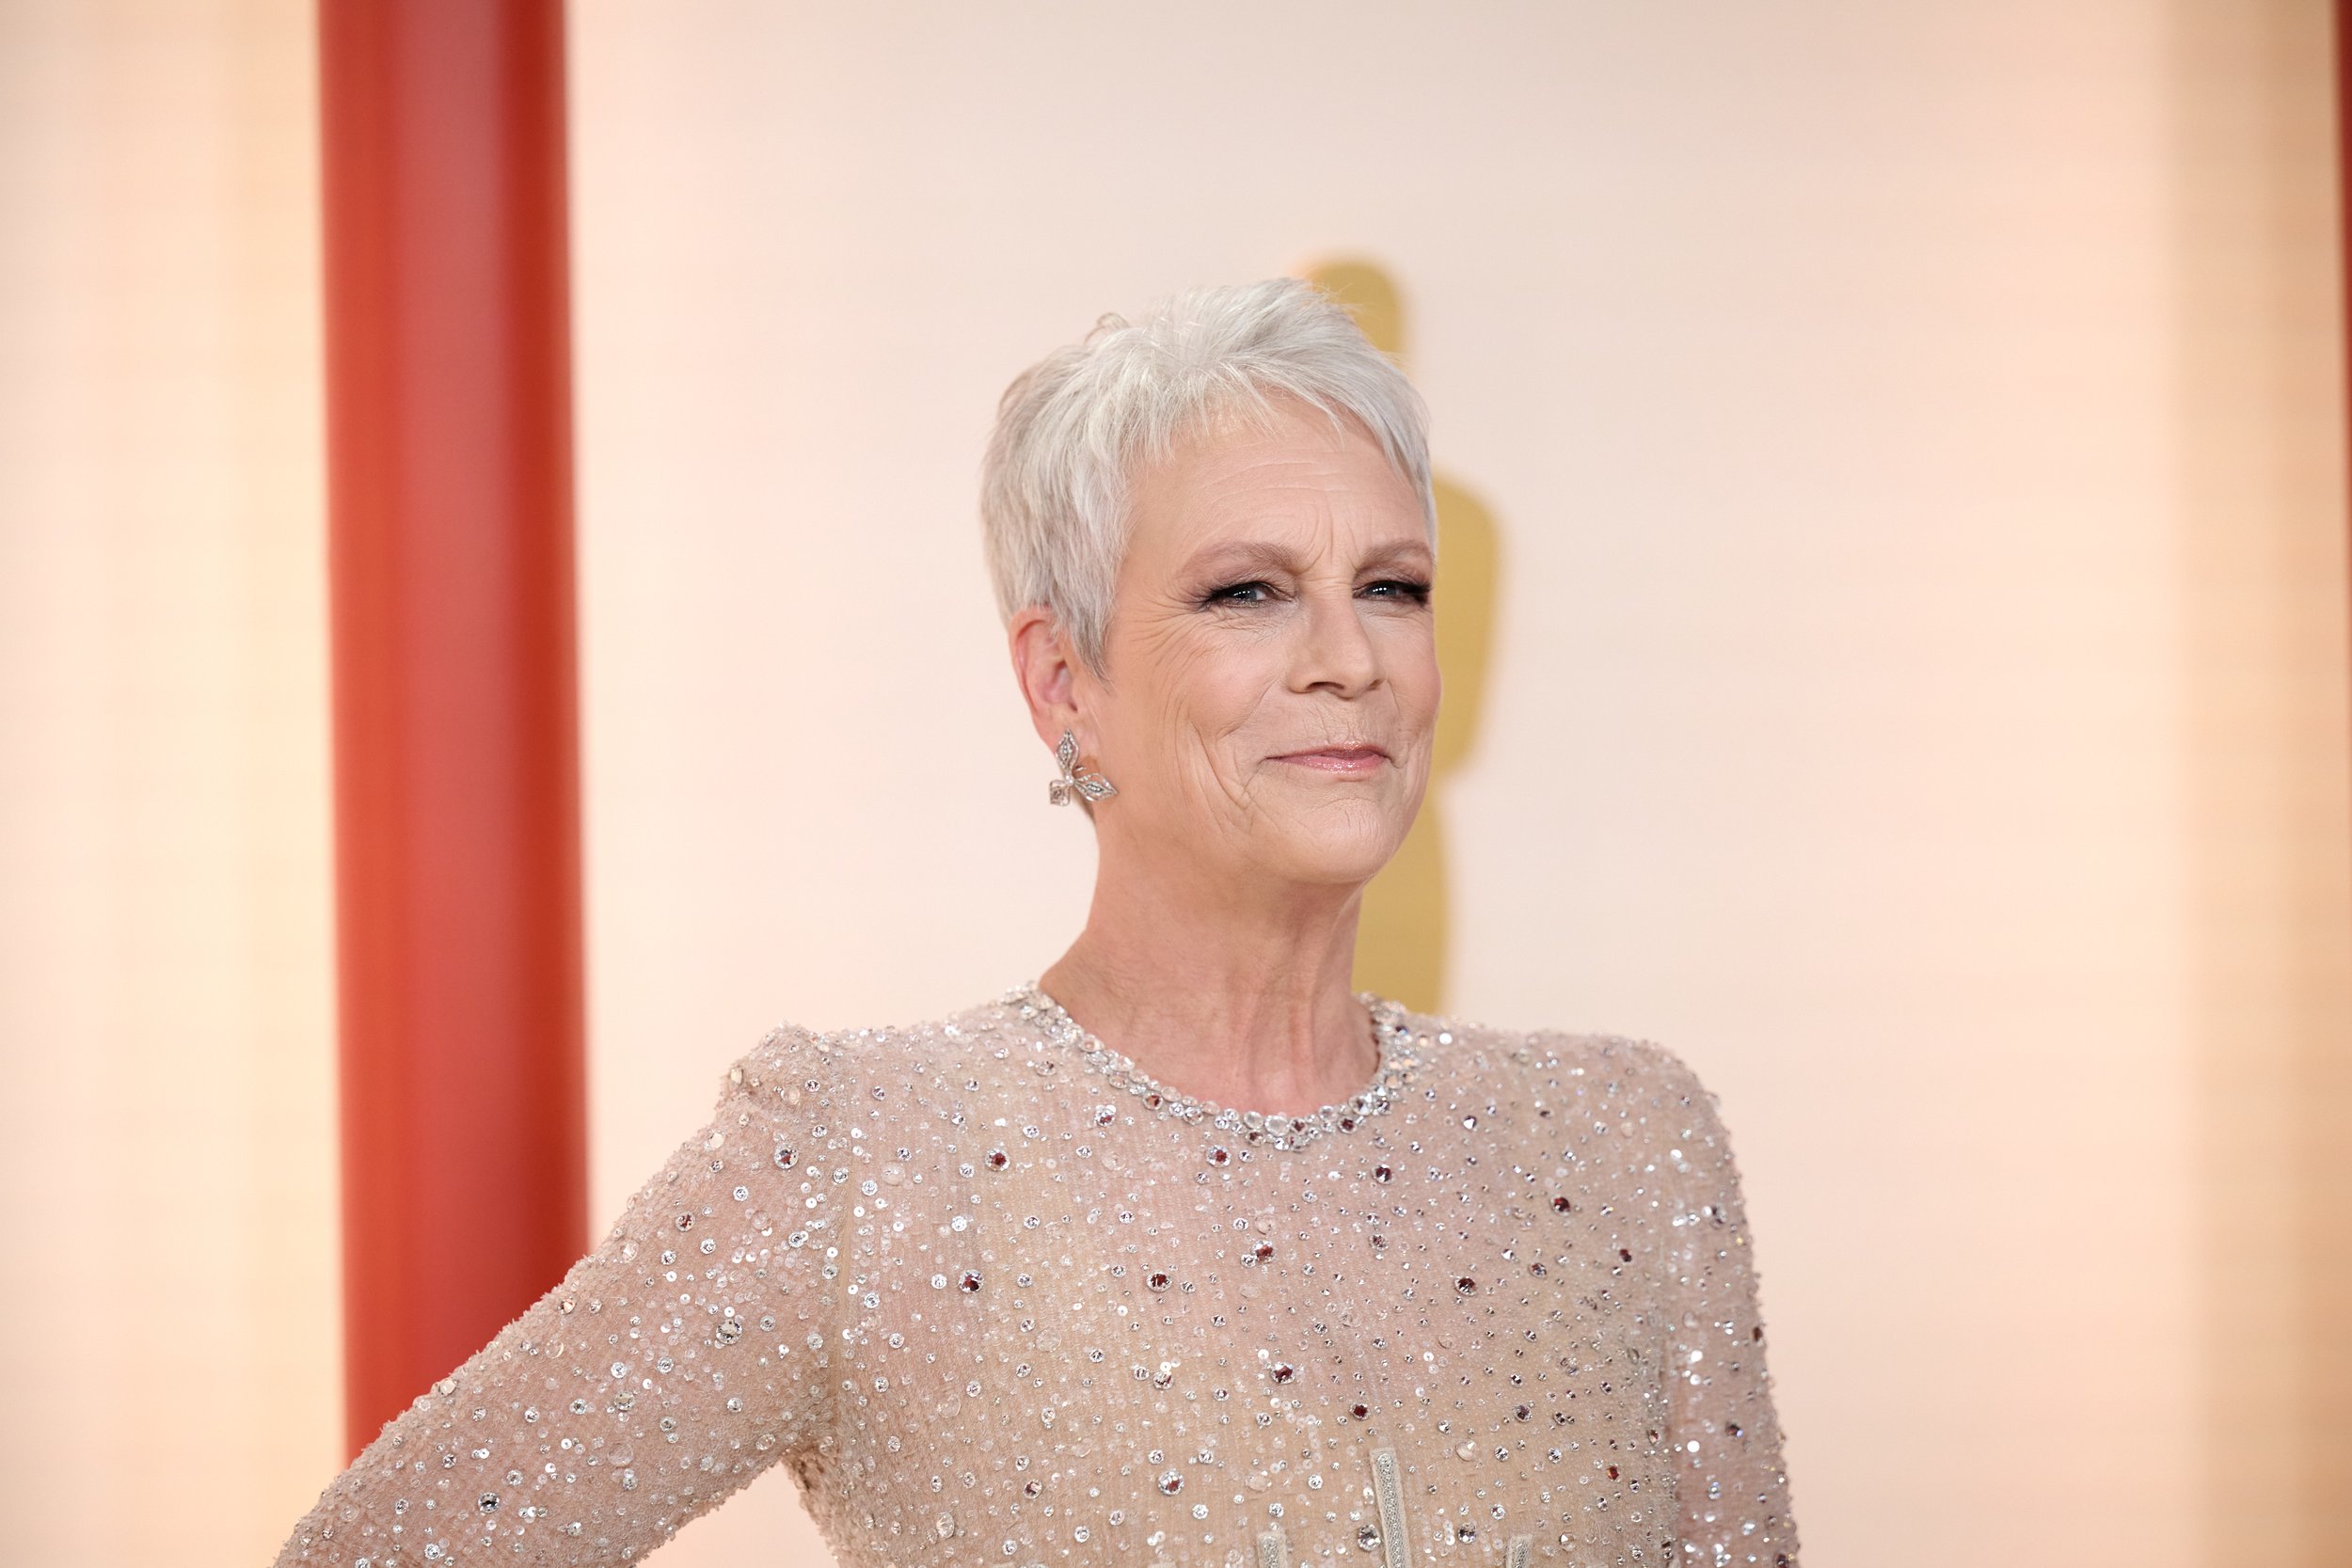 Oscar® nominee Jaime Lee Curtis arrives on the red carpet of the 95th Oscars